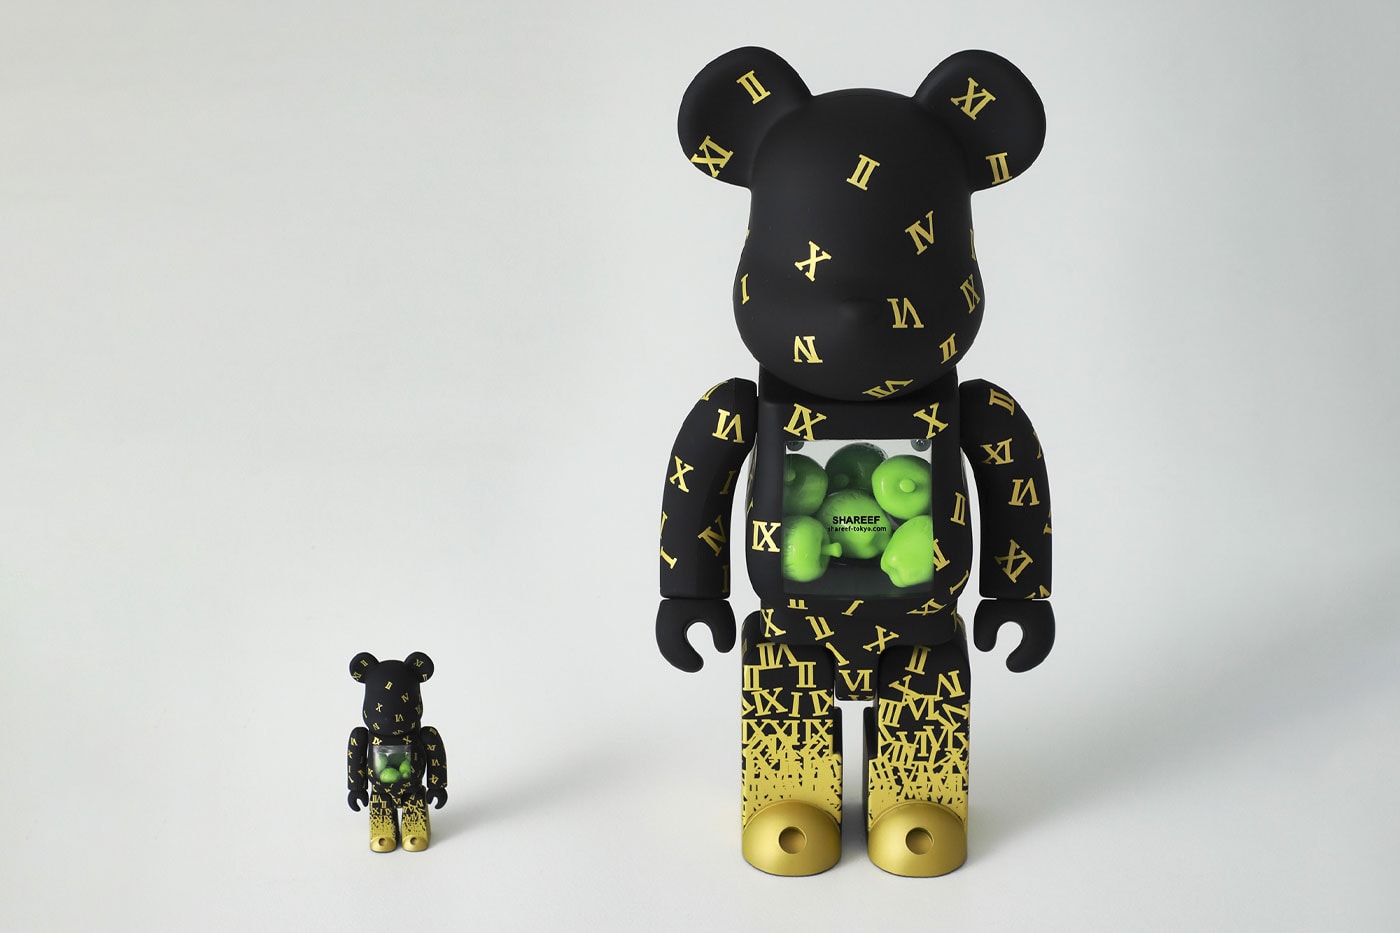 SHAREEF medicom Toy BEARBRICK collaboration black gold transparent chest apples release info date price